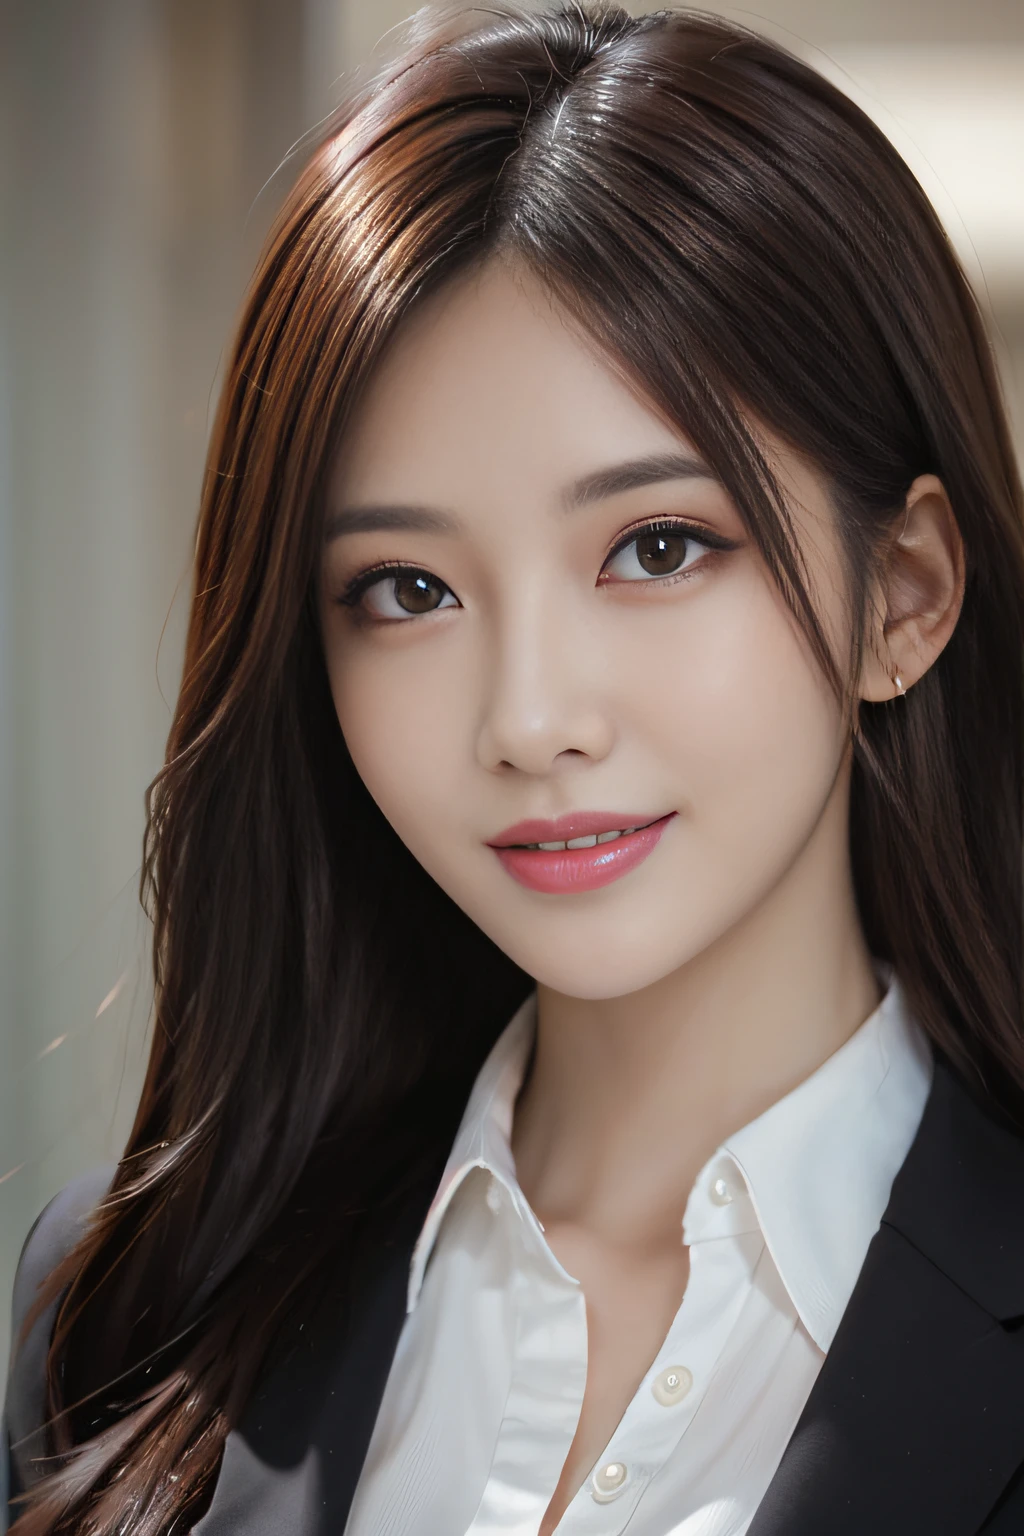 masutepiece, Best Quality, Photorealistic, Ultra-detailed, finely detail, High resolution, 8K Wallpaper, 1 beautiful woman,, light brown messy hair, in a business suit, foco nítido, Perfect dynamic composition, Beautiful detailed eyes, detailed hairs, Detailed realistic skin texture, Smiling, Close-up portrait, Model body type